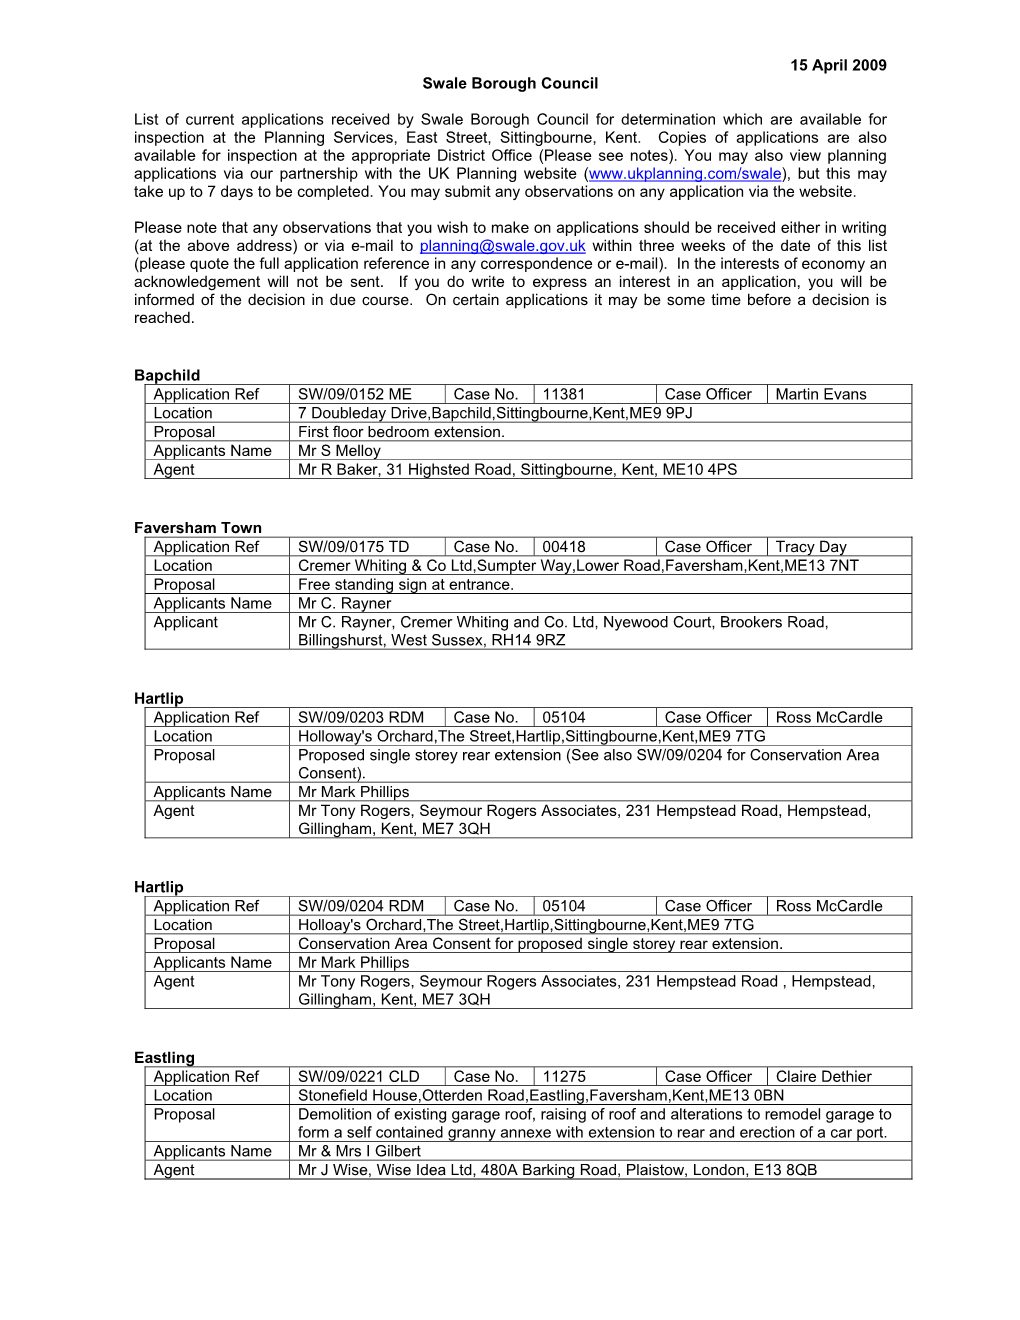 15 April 2009 Swale Borough Council List of Current Applications Received by Swale Borough Council for Determination Which Are A